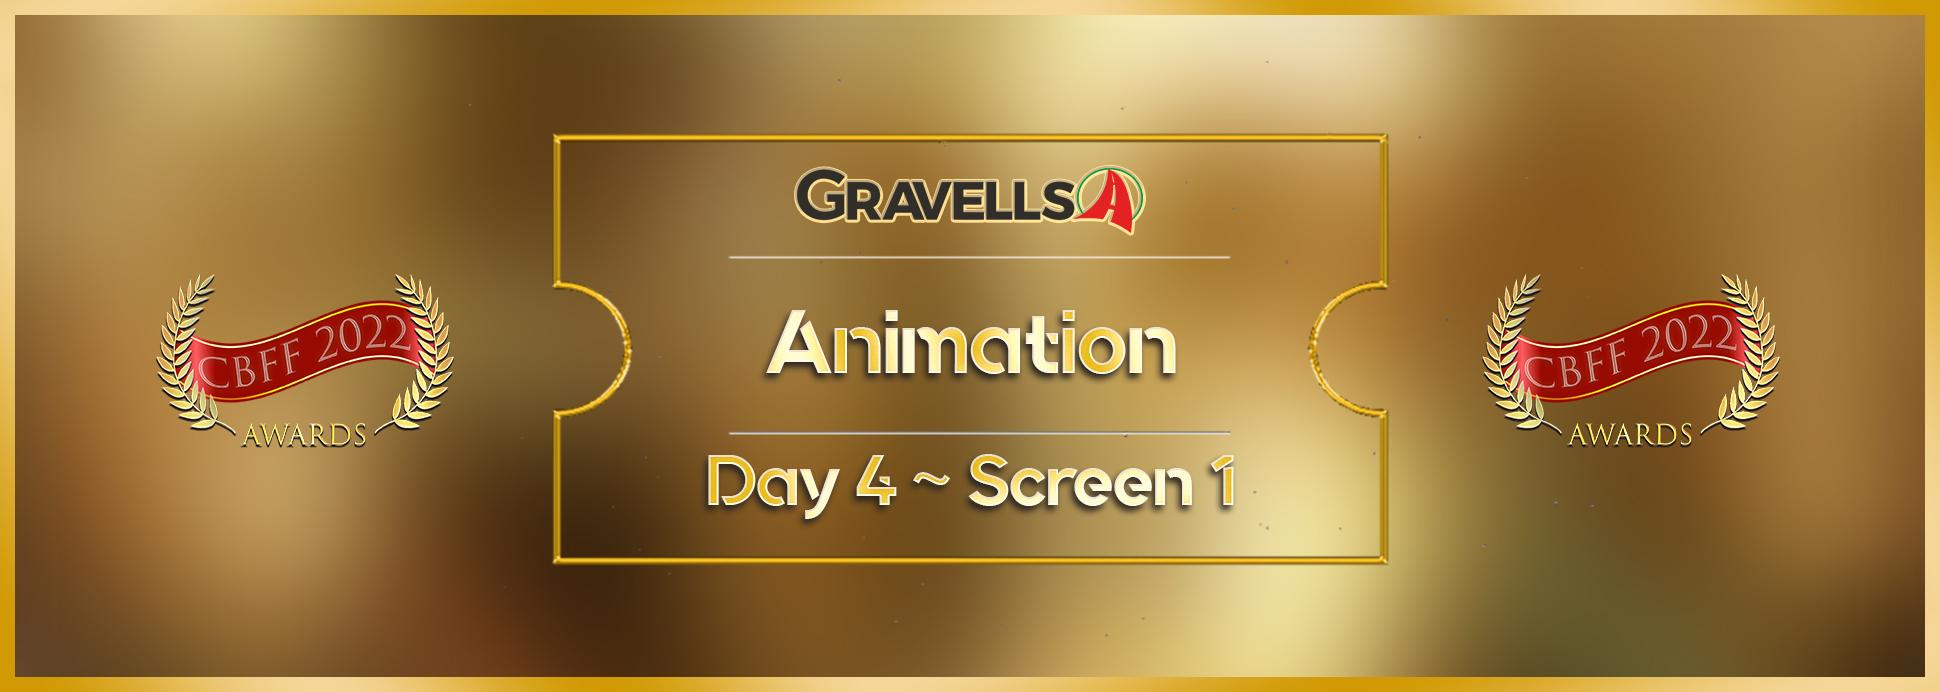 Day 4 Screen 1 Animation